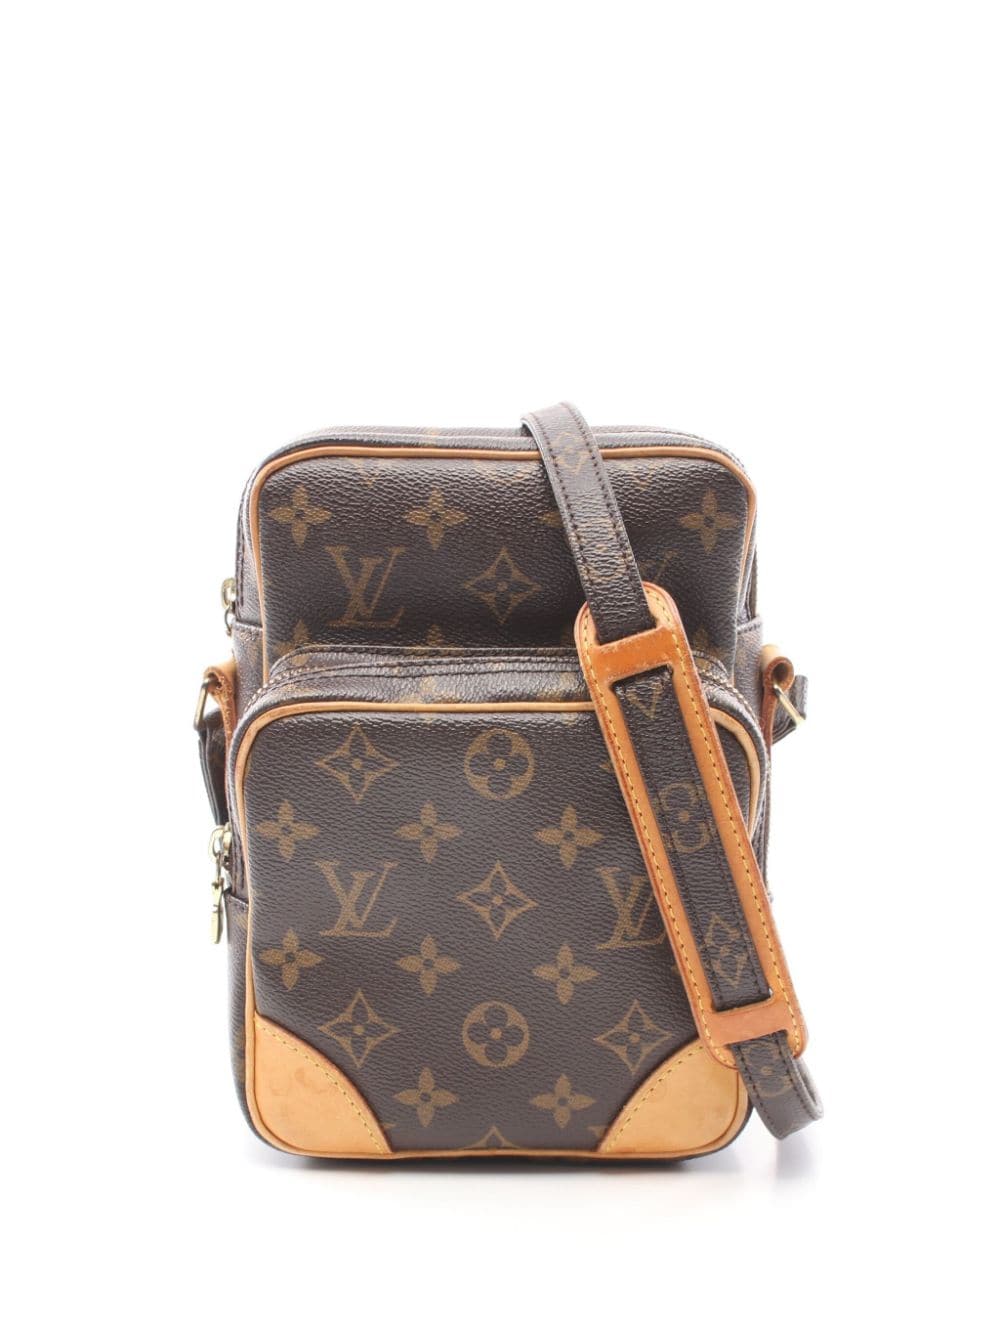 Pre-owned Louis Vuitton 2004 Amazon Shoulder Bag In Brown